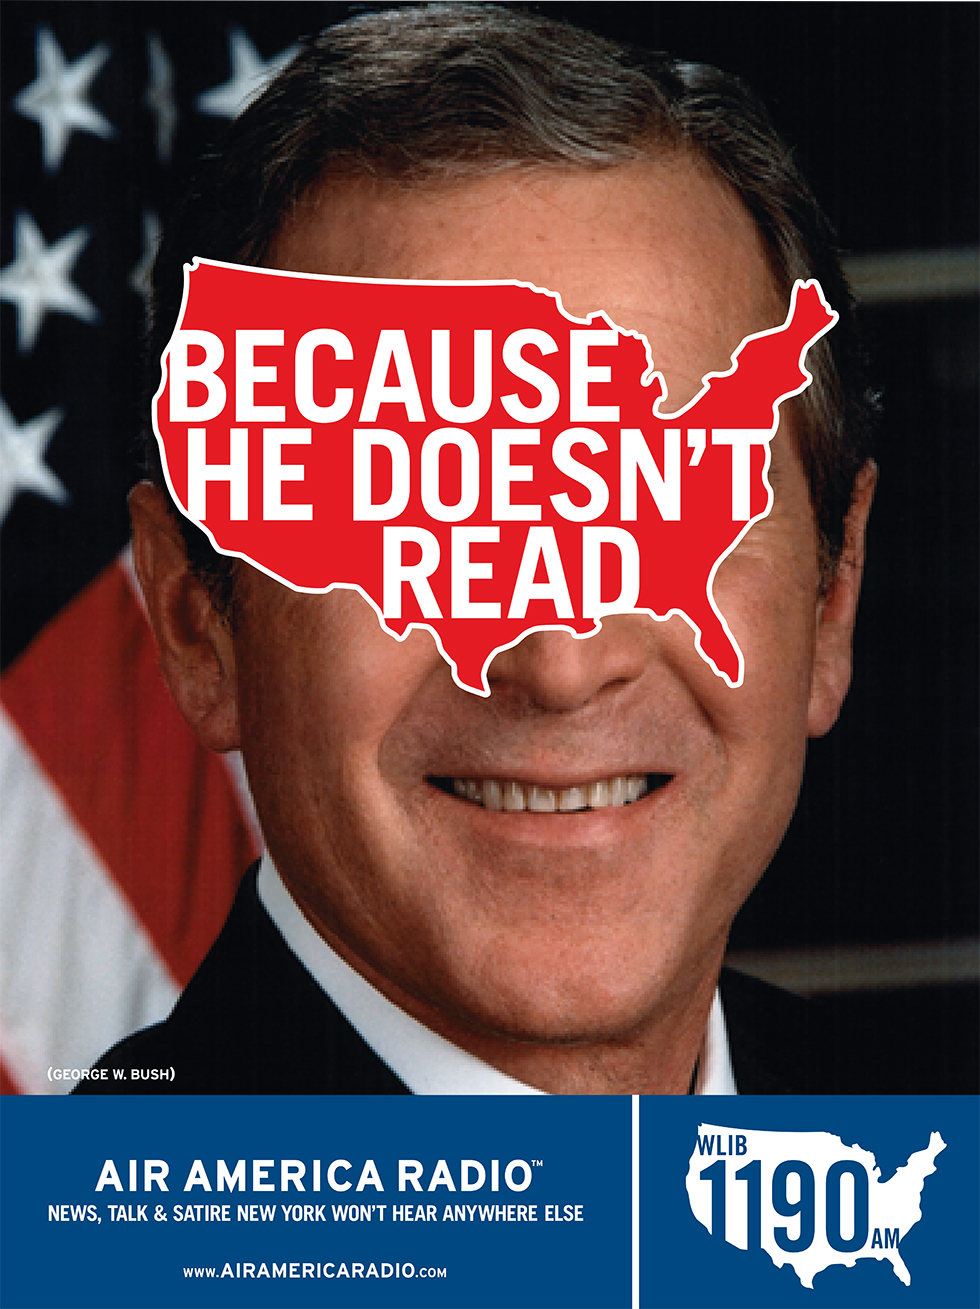 Air America poster by Emily Oberman. Portrait of George W. Bush with a red silouhette of the US and the words "Because He Doesn't Read" over his eyes.